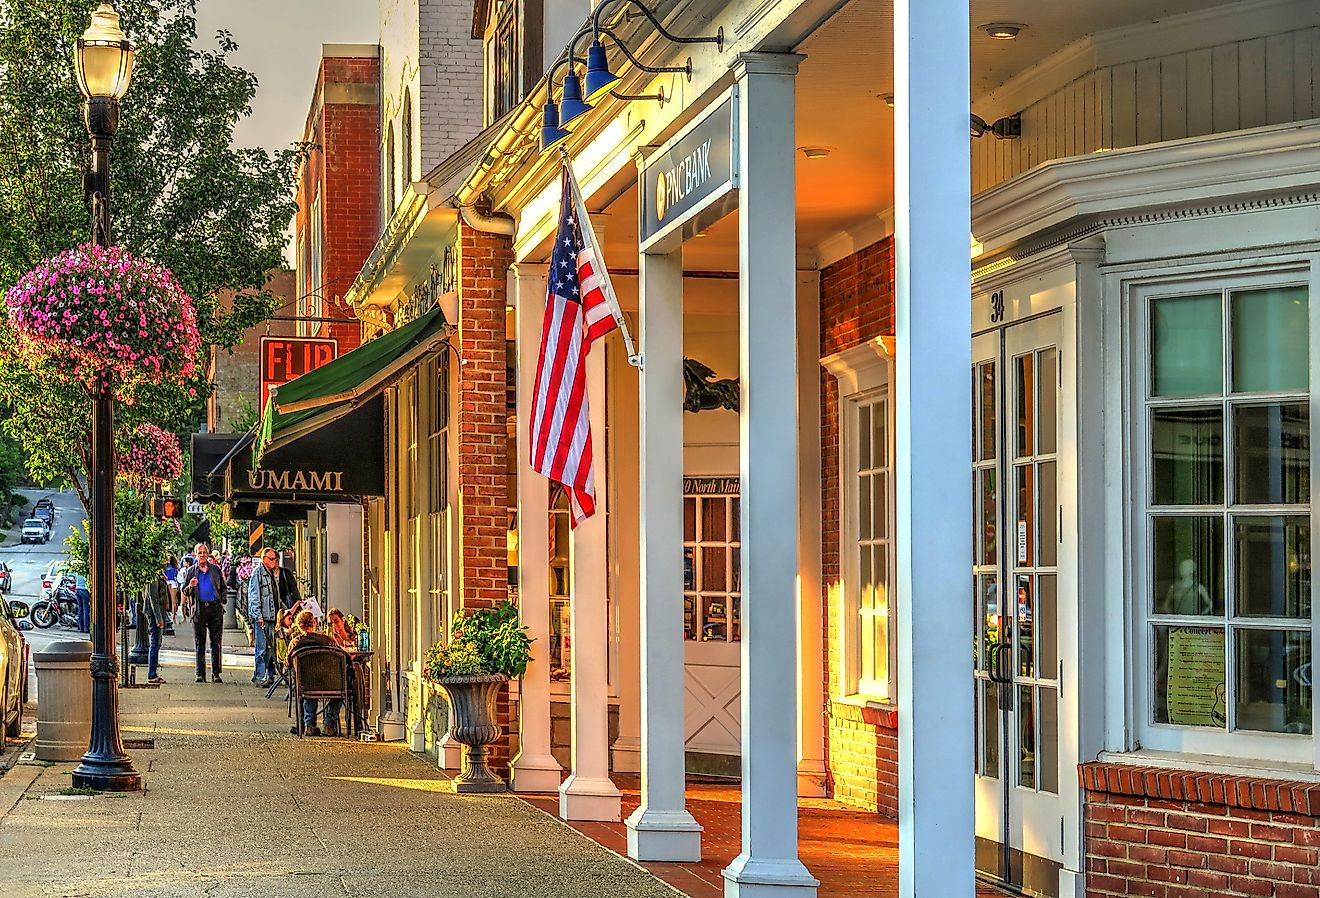 People Dining at Outdoor Sidewalk Seating at Umami on Main Street in Chagrin Falls, Ohio. Image credit Lynne Neuman via Shutterstock